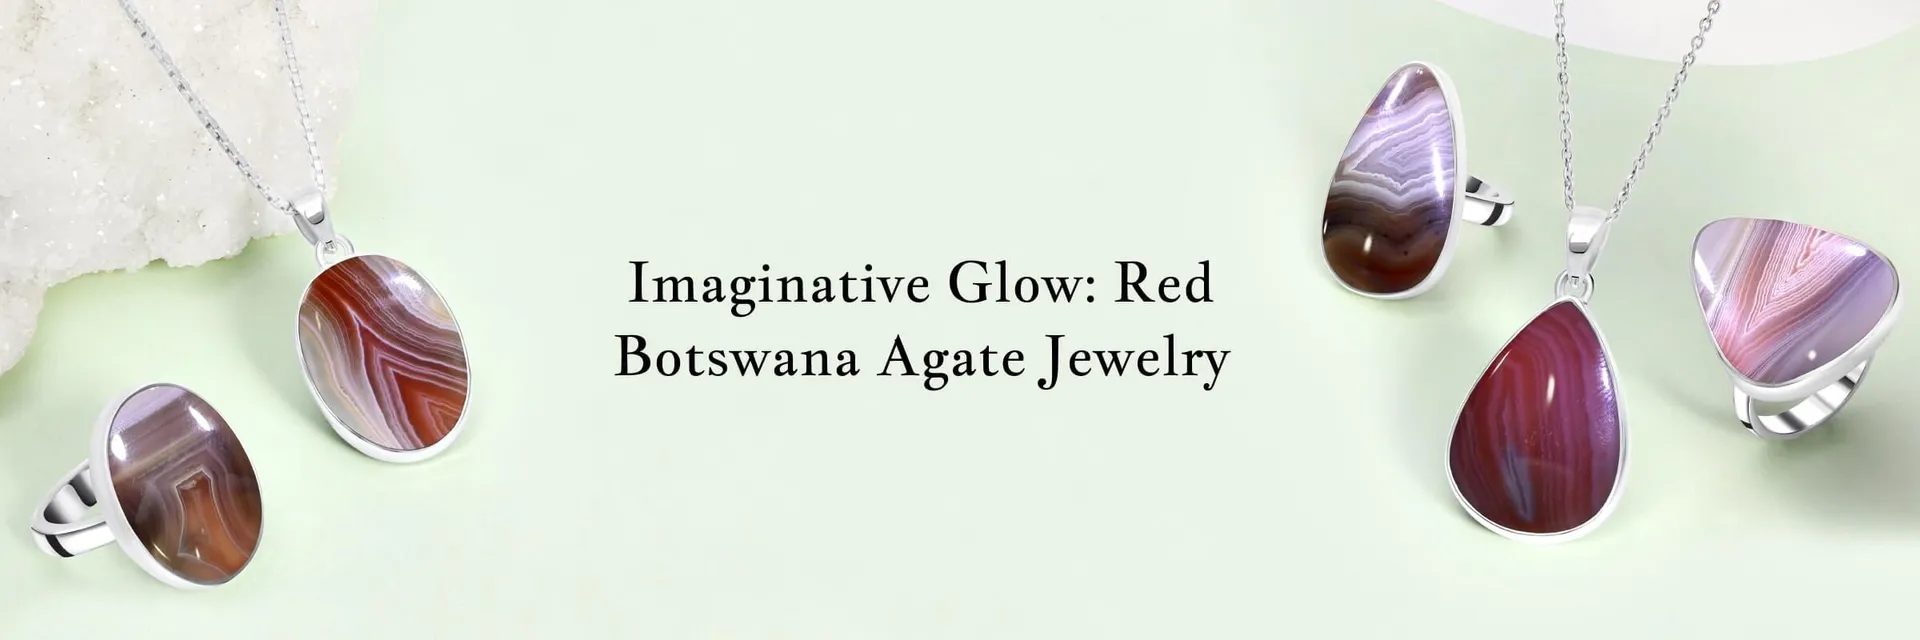 Radiant Reverie: Red Botswana Agate Jewelry that Ignites Imagination

People adore Botswana Agate because the patterns are gorgeous to look at and the banding is nearly perfect. The Beautiful Red Botswana Agate Jewelry , Red Botswana Agate Pendant, Red Botswana Agate Earrings, Red Botswana Agate Necklace, and Red Botswana Agate Bracelet are very popular pieces of red botswana jewelry. The stone is well known to have many advantages, including sharpening the wearer's focus.
Visit now :- https://www.rananjayexports.com/blog/red-botswana-agate-jewelry-that-Ignites-Imagination